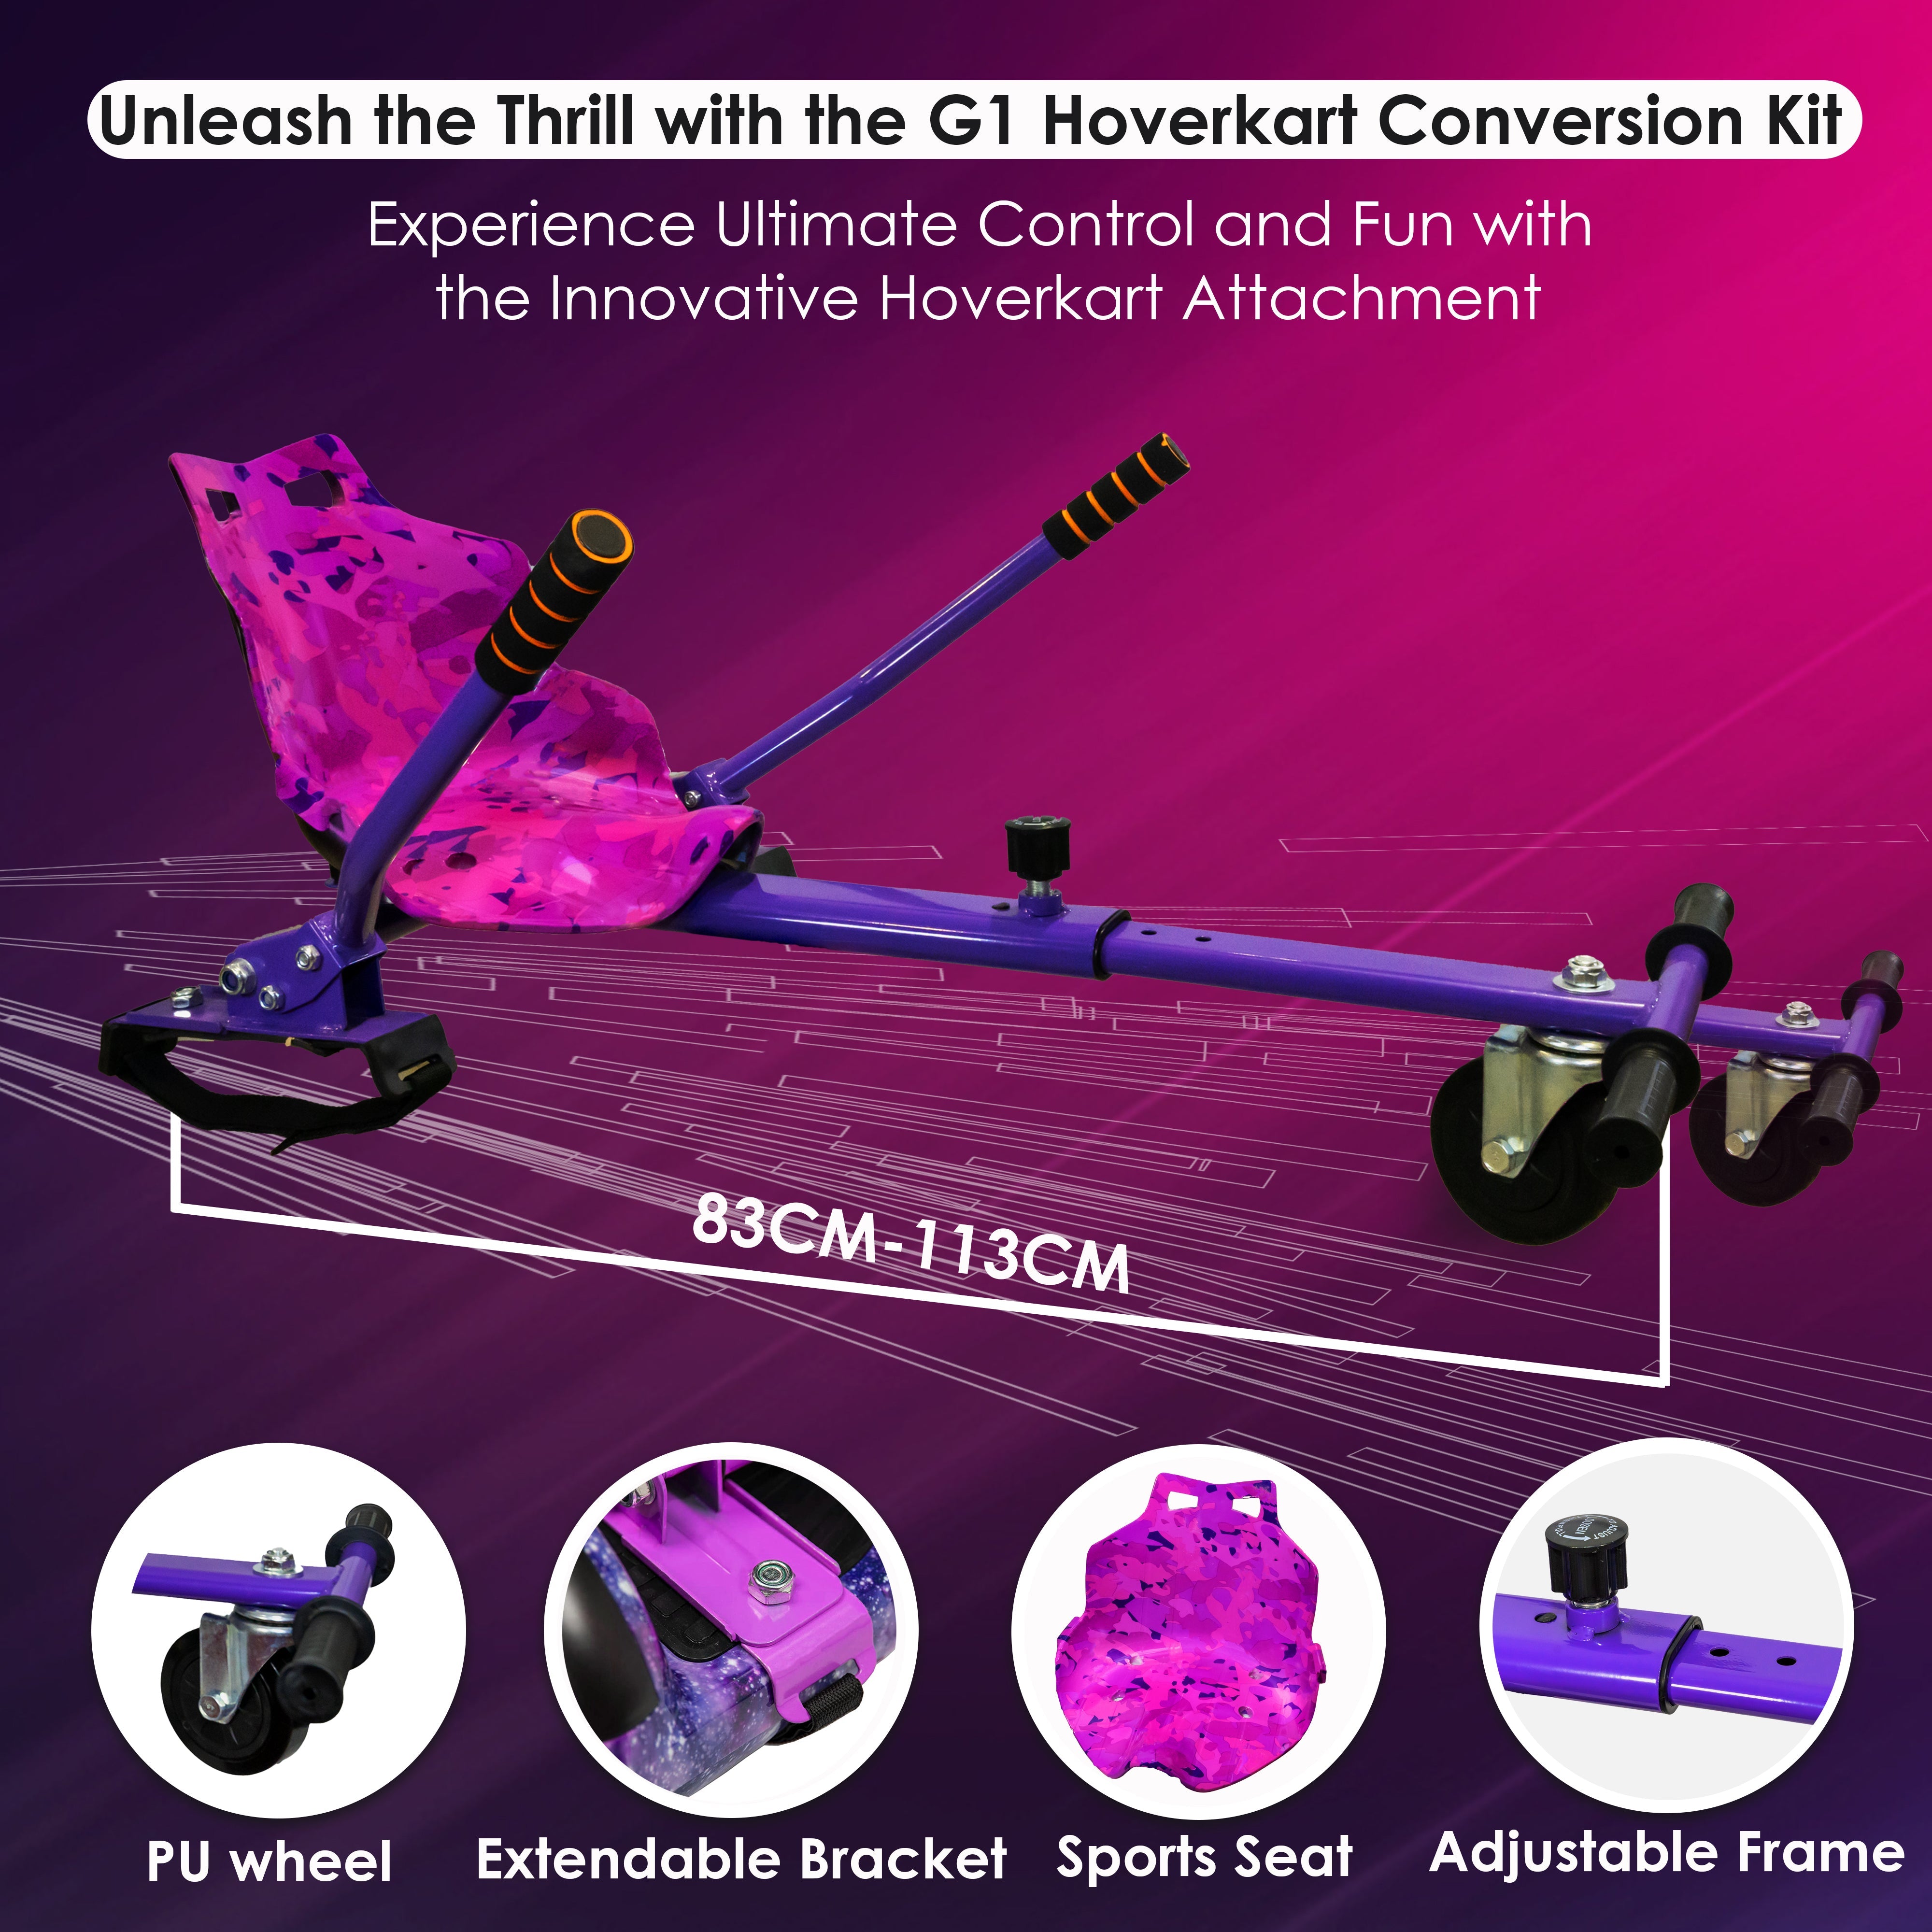 R1 hoverkart conversion kit showcased with adjustable features and a close-up of a purple sports seat and extendable bracket.